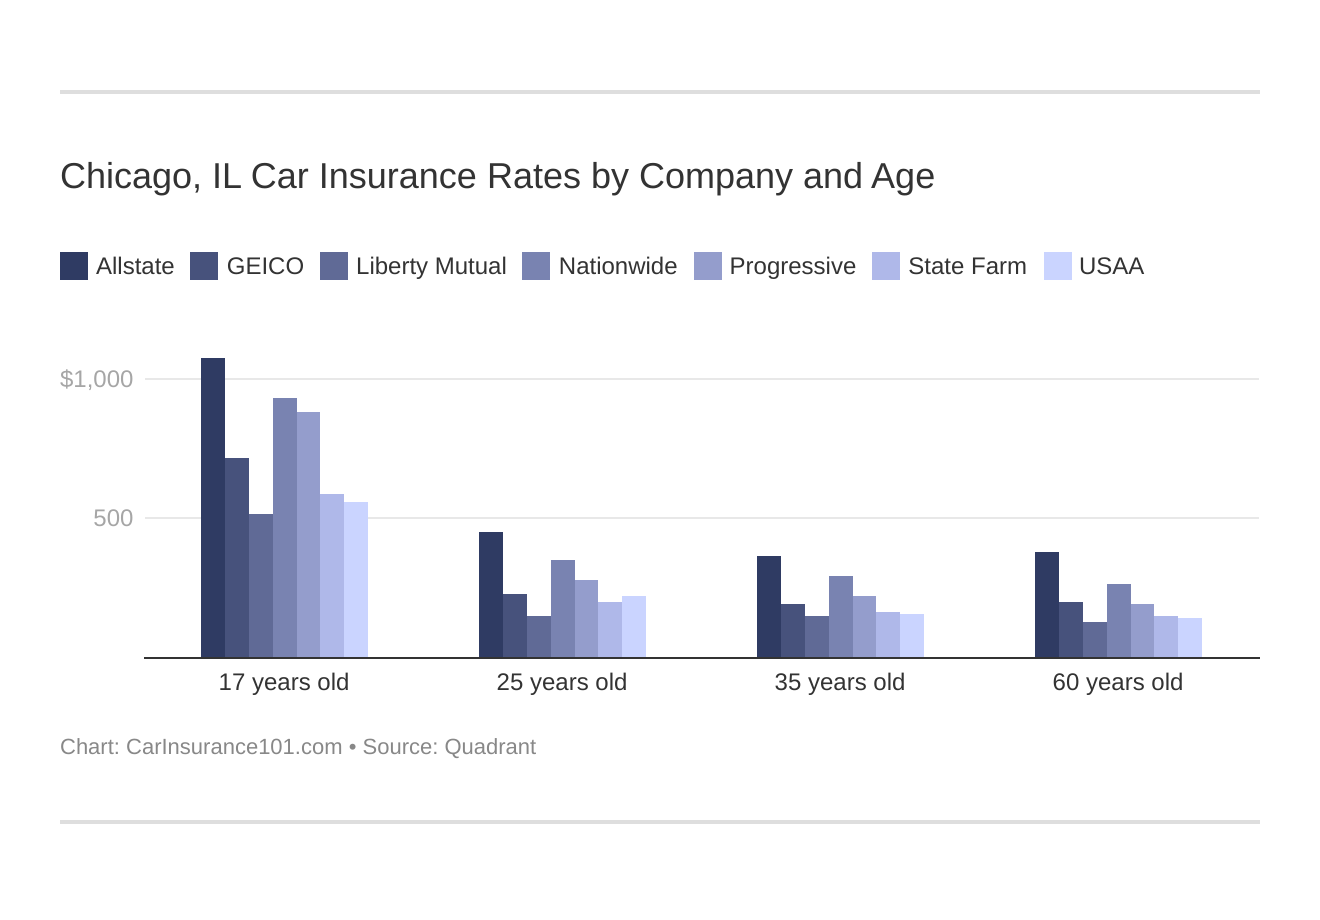 Chicago, IL Car Insurance Rates by Company and Age